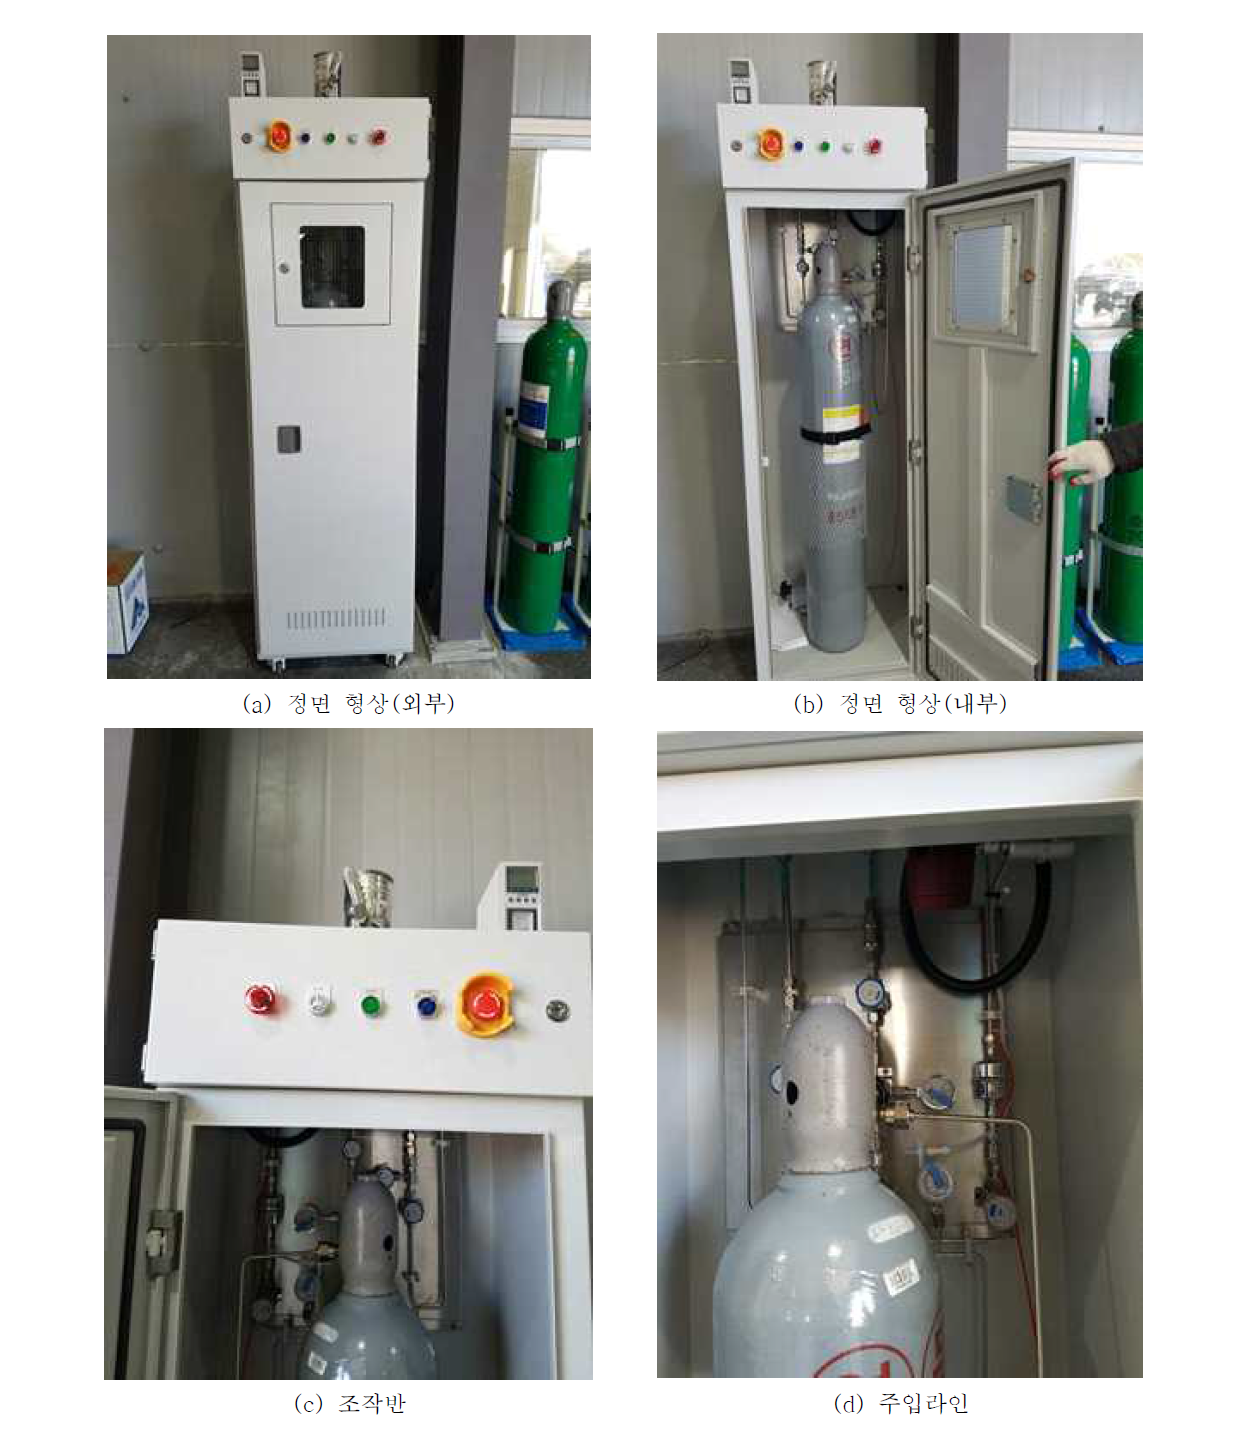 SiH4 gas cabinet system